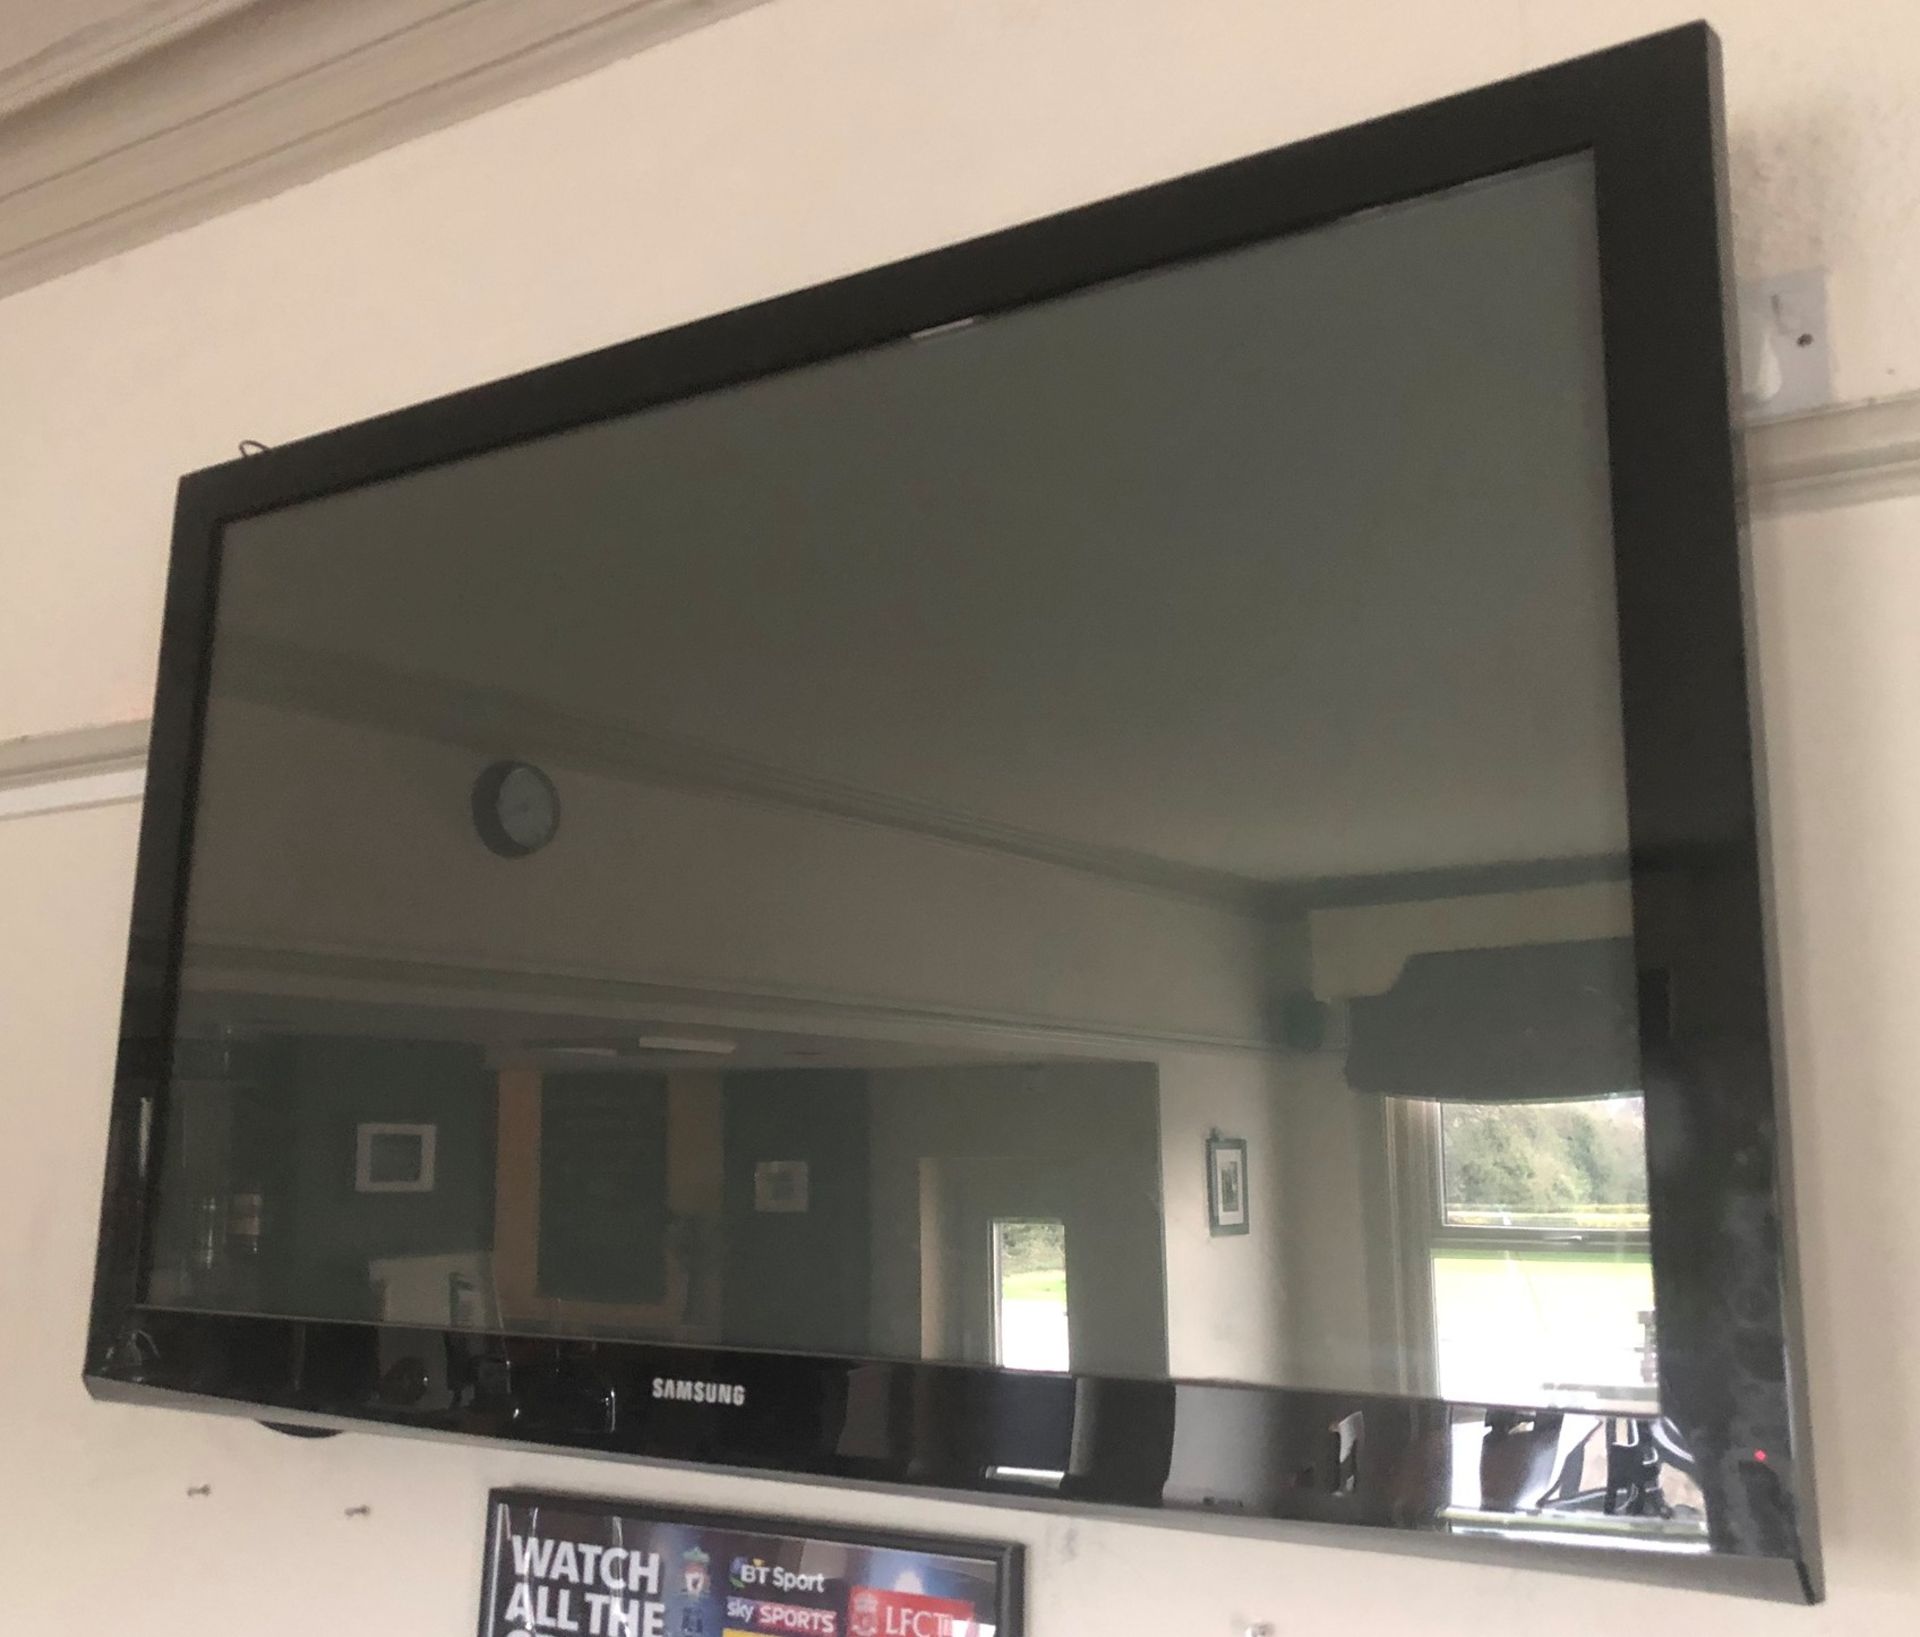 Samsung PS50A457P1DXXU 50" Wall Mounted HD Television - Image 2 of 3